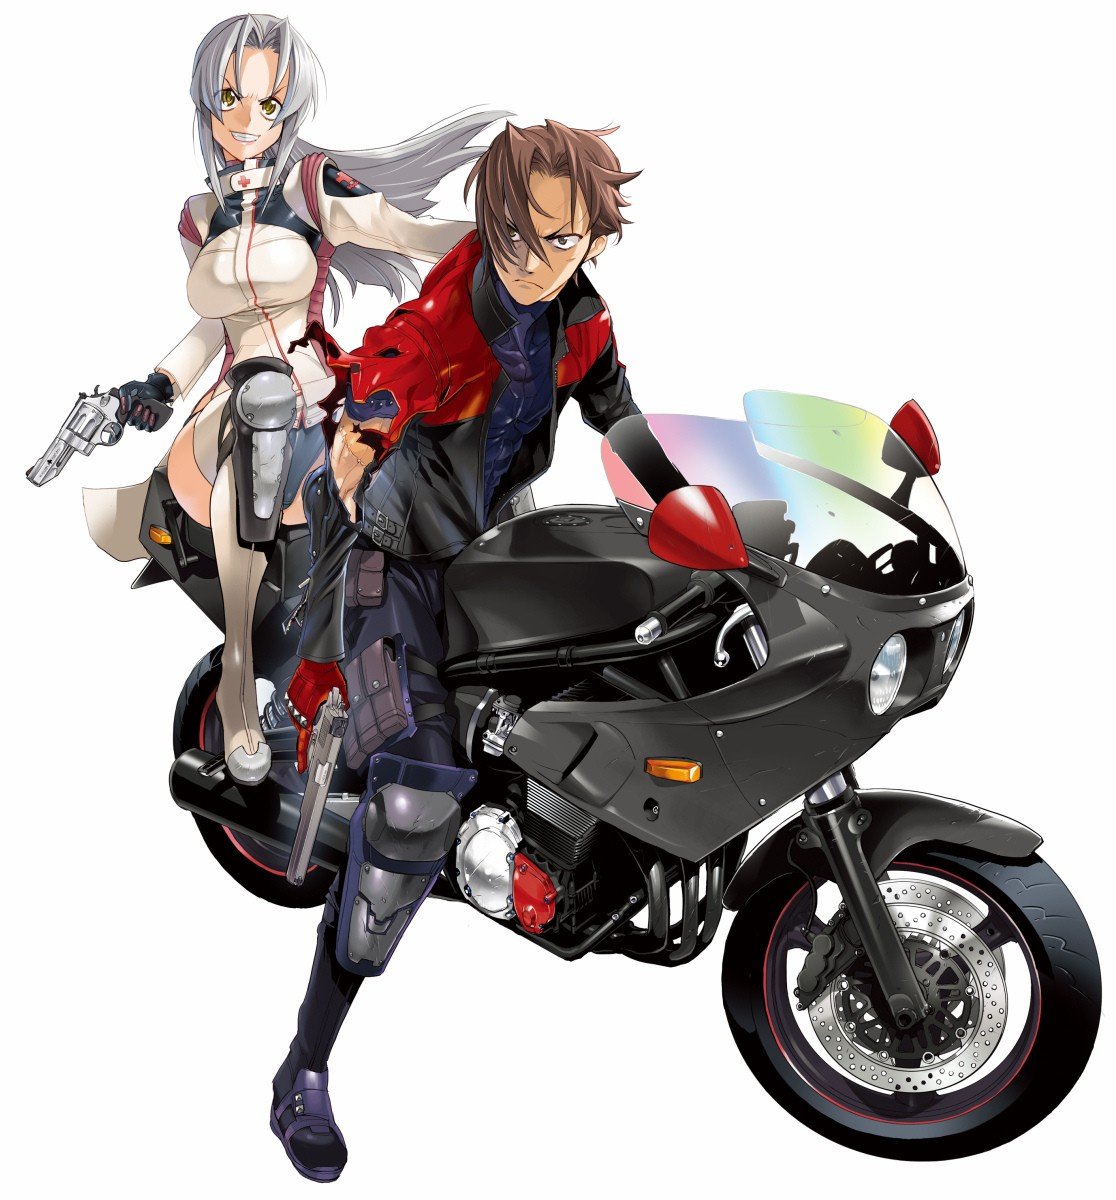 Triage X, Nurse outfit, Motorcycle Wallpaper